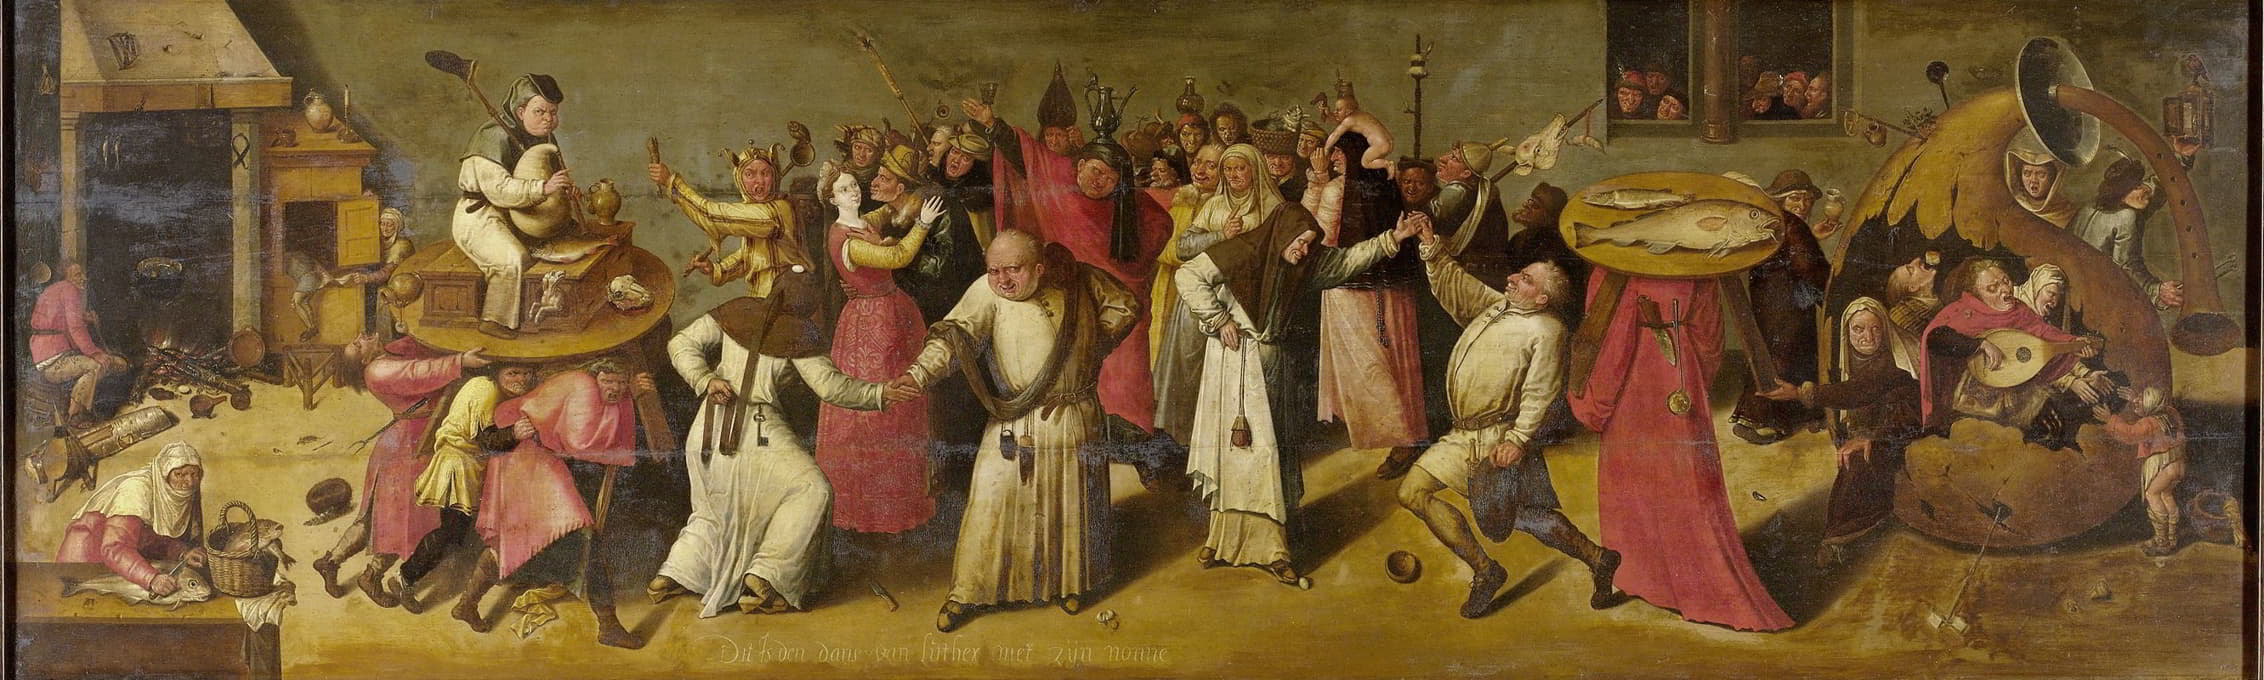 Manner of Hieronymus Bosch - Battle between Carnival and Lent